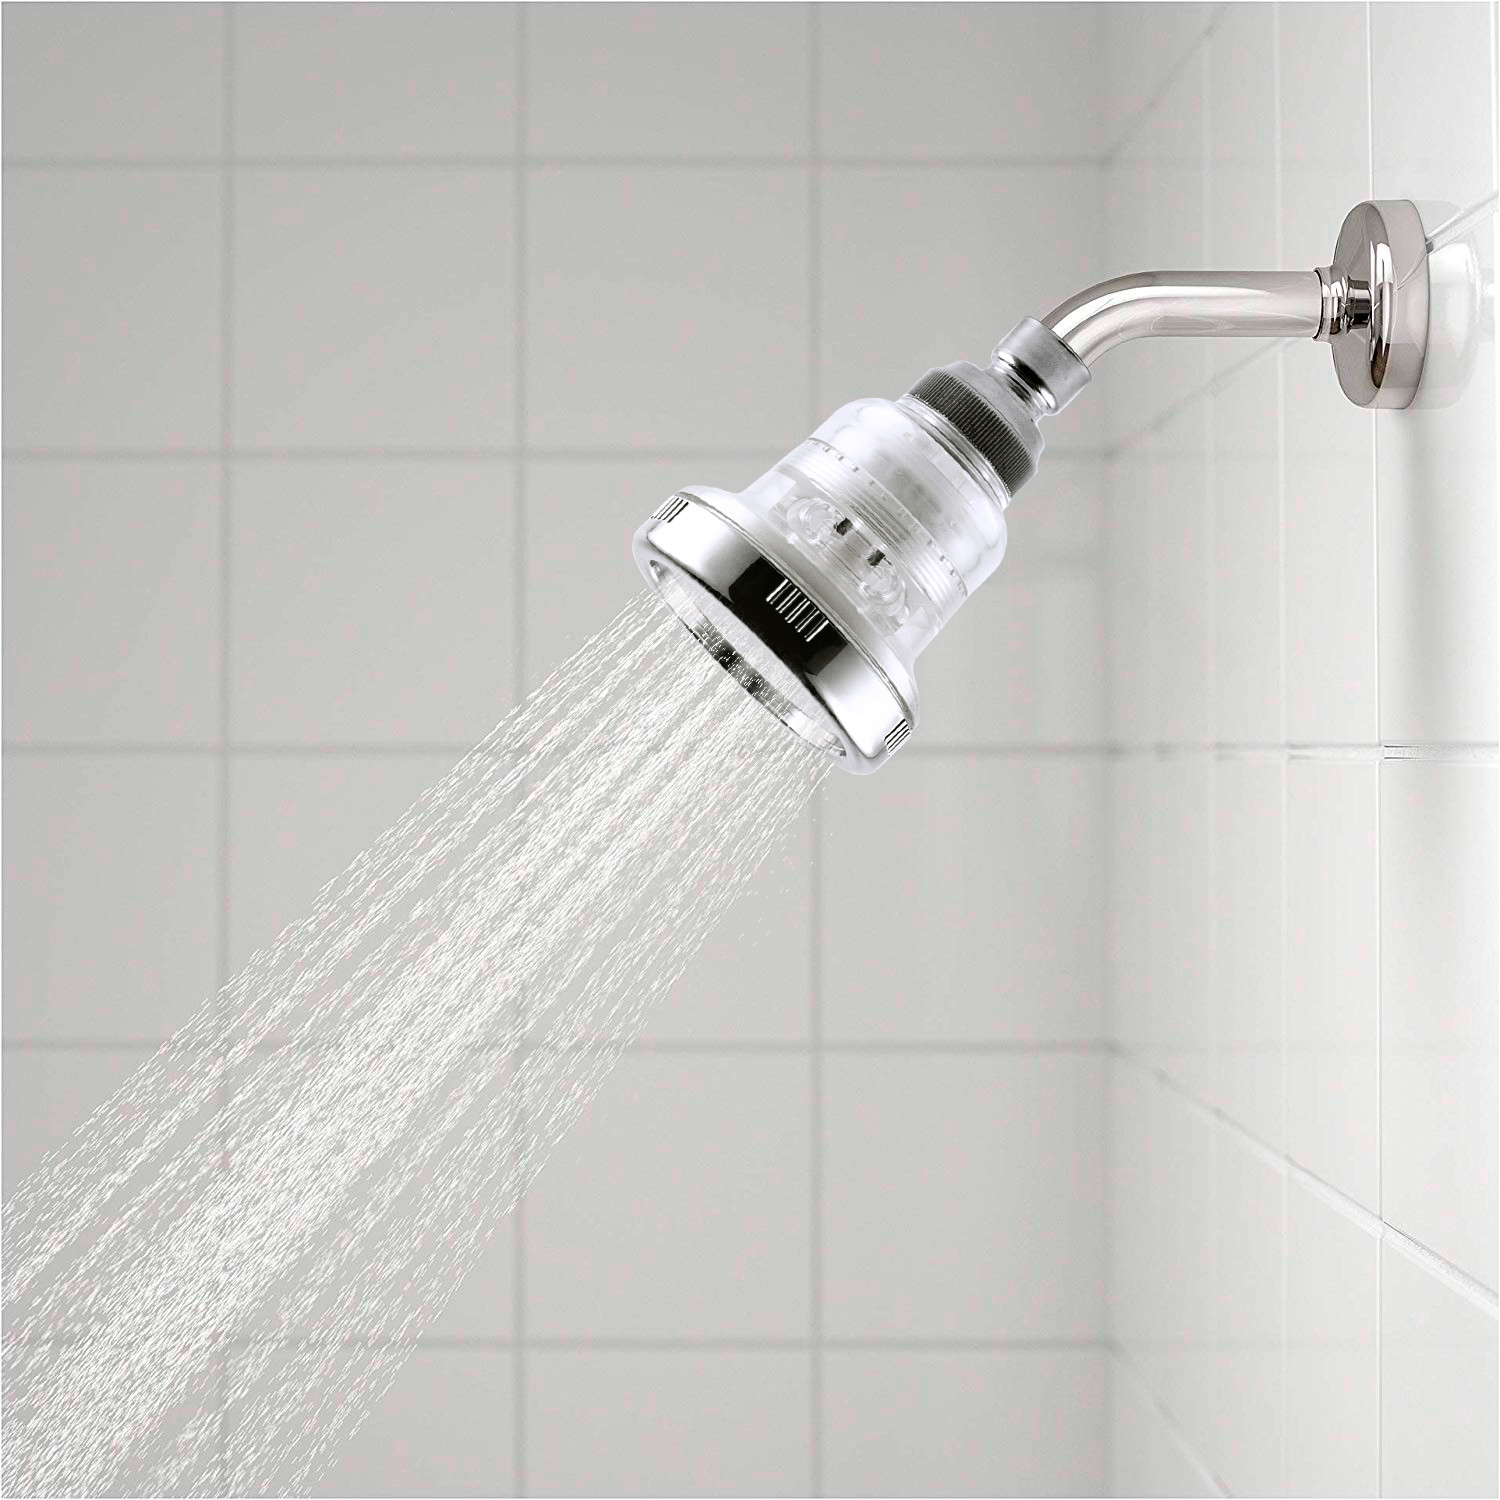 How To Install A Body Shower Spa Showerhead